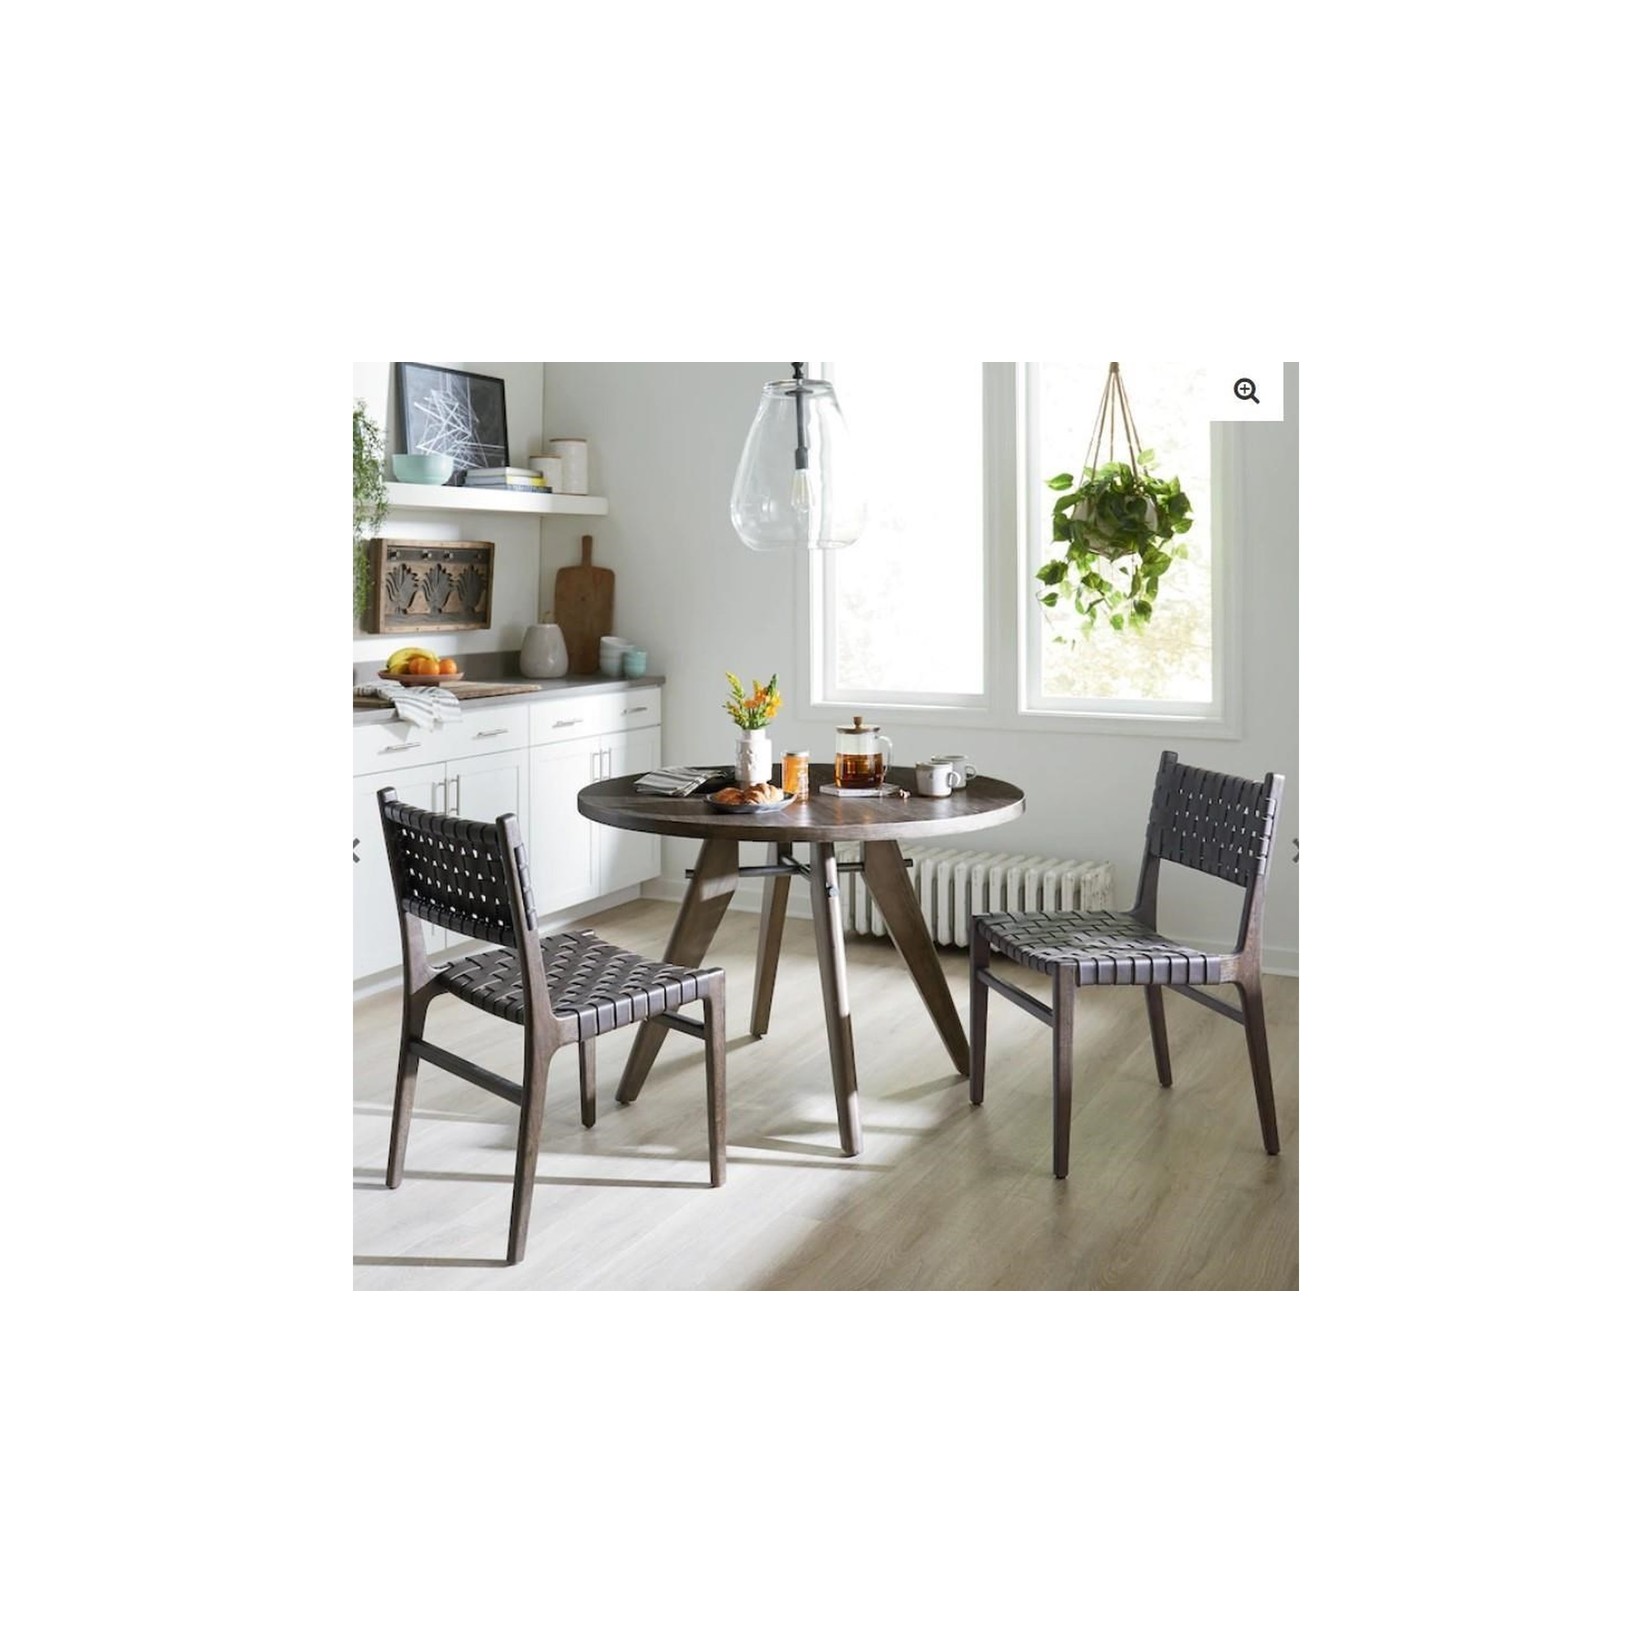 Mickler & Co. Gaby Round Dining Table